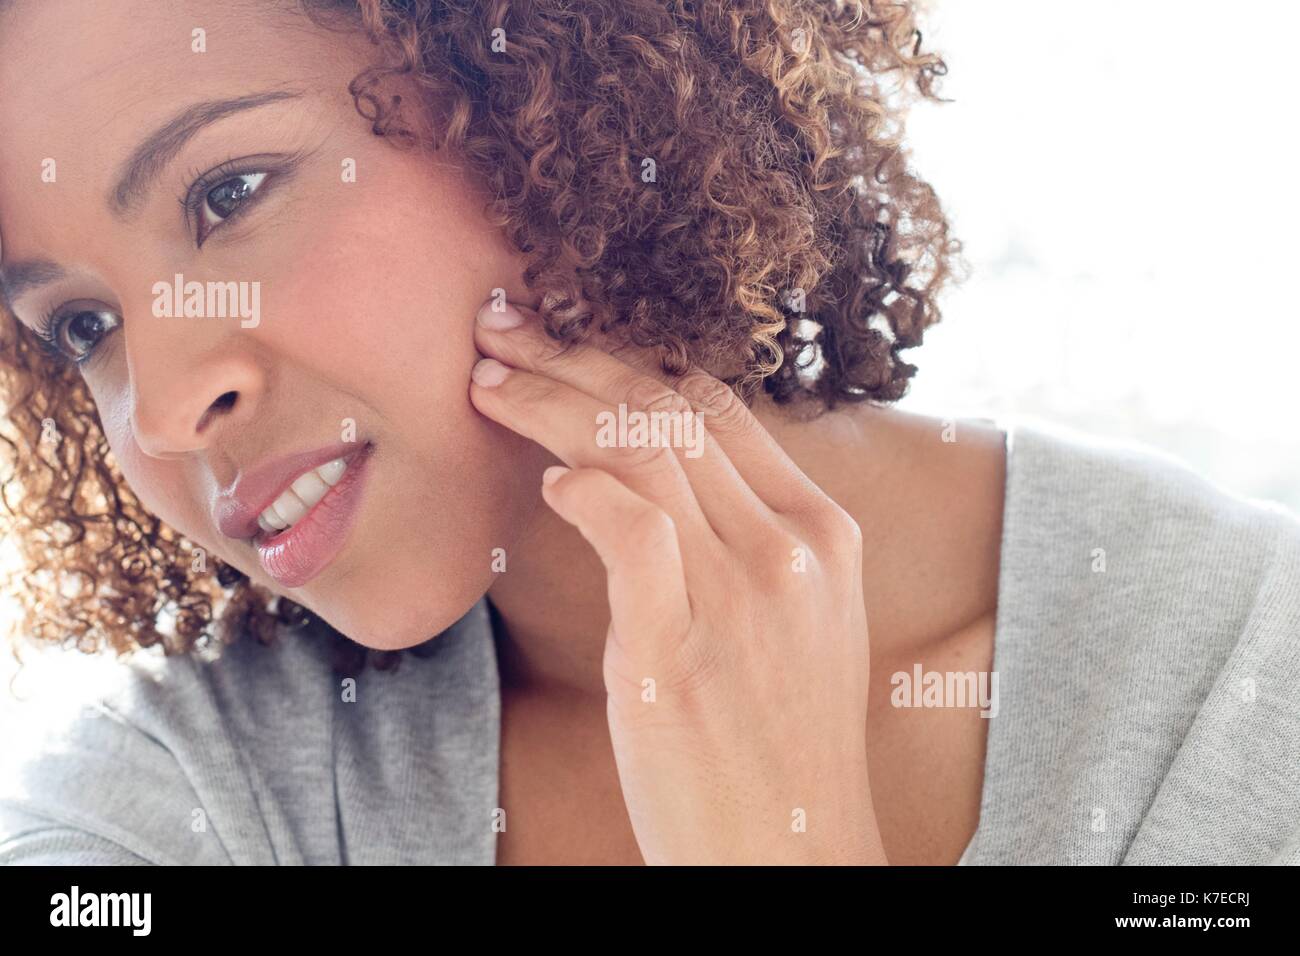 Portrait of mid adult woman touching face. Stock Photo